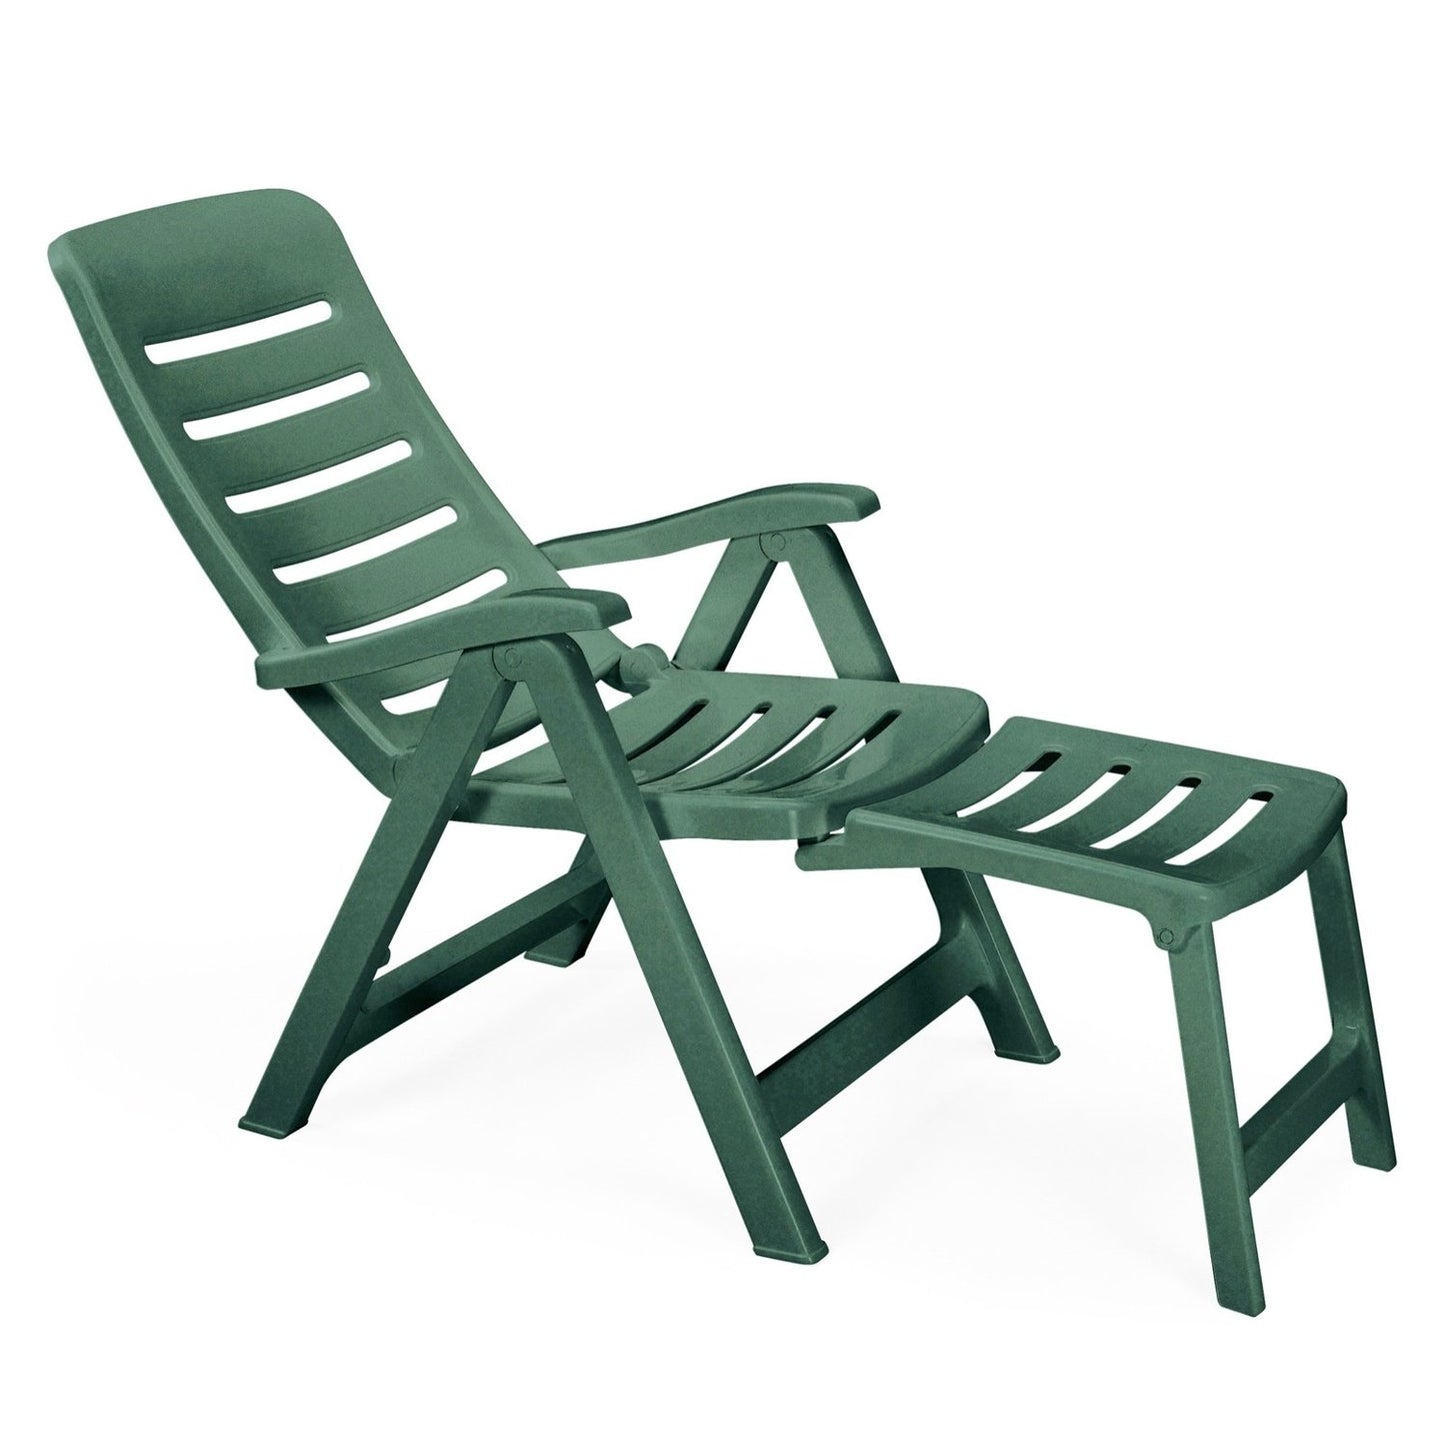 Quintilla 2-in-1 folding sun lounger by Scab Design - myitalianliving